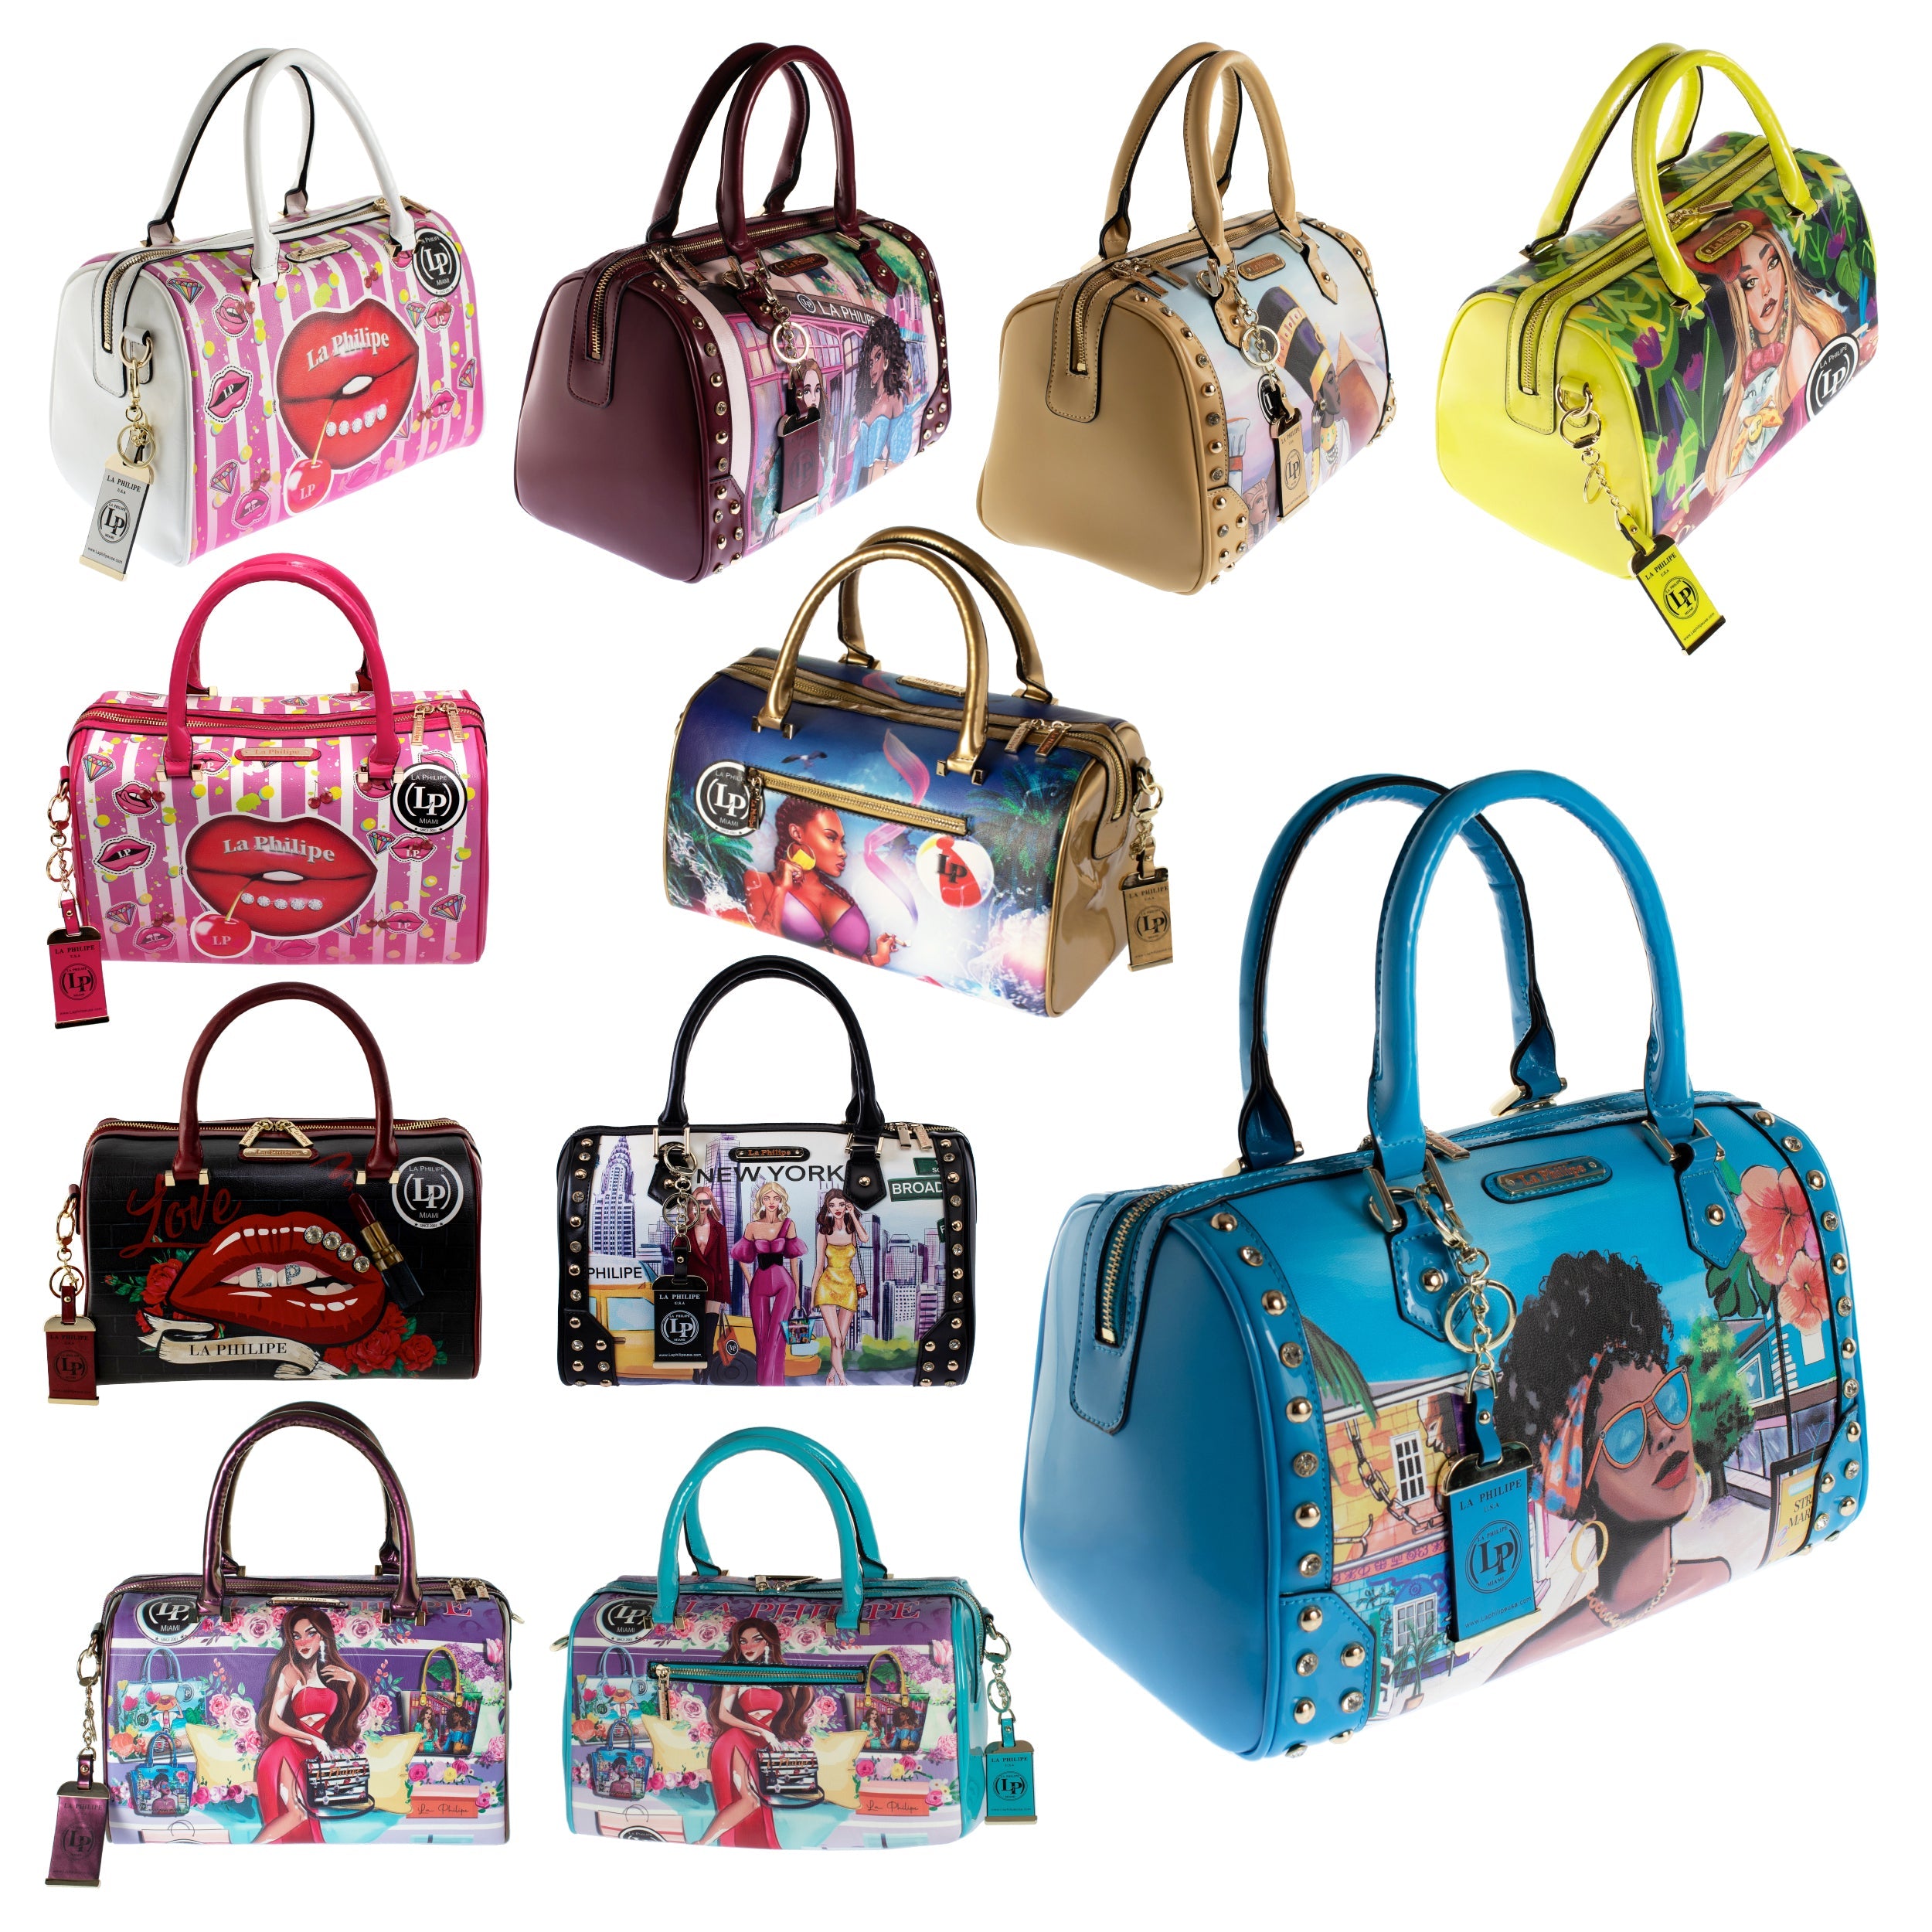 Women's Wholesale Tote in Assorted Print - Bulk Case of 24